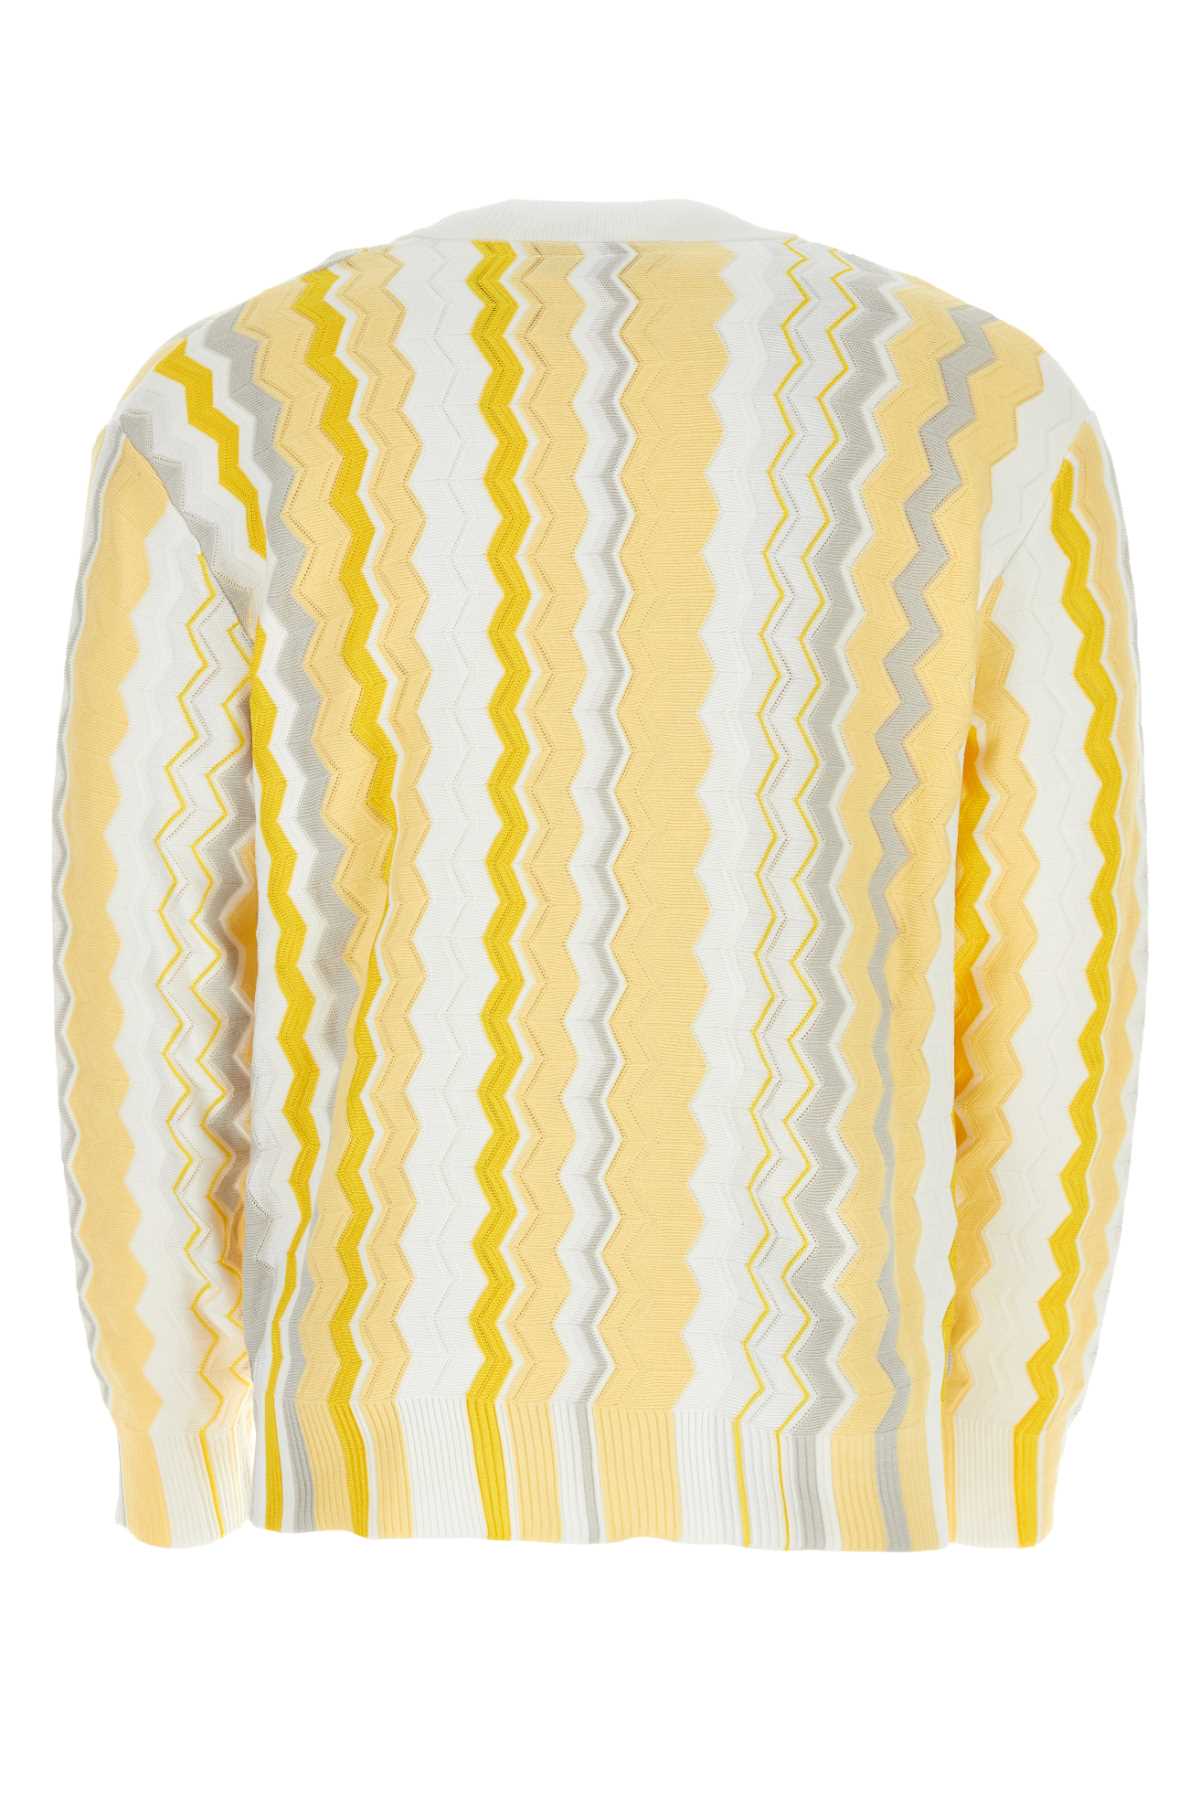 Missoni Embroidered Cotton Blend Cardigan In Whiteyellow